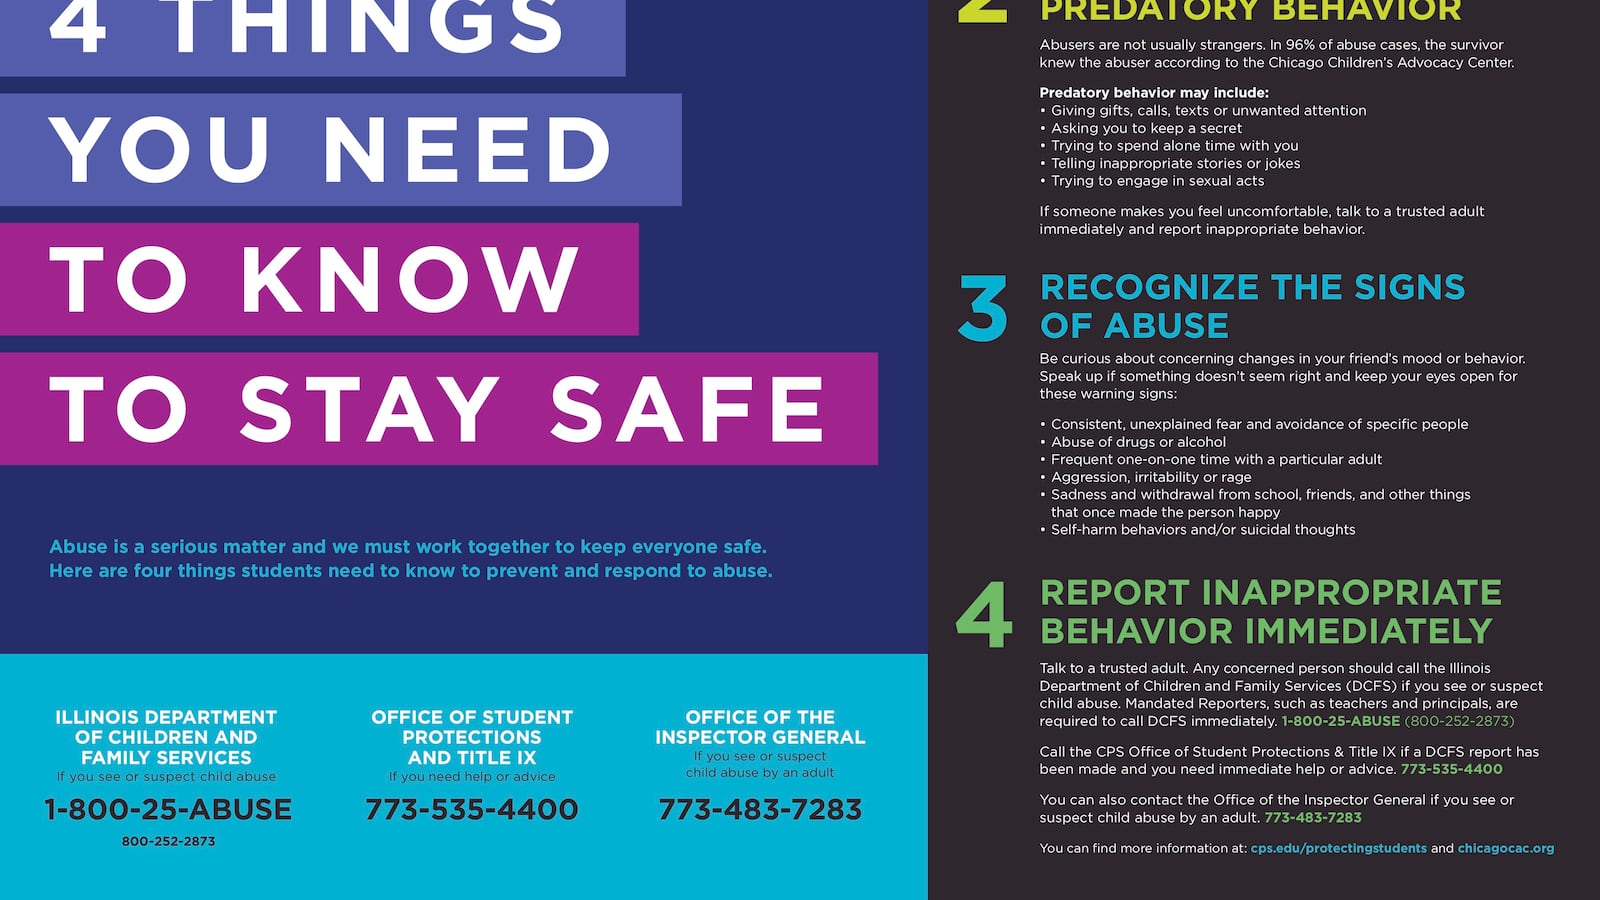 Last fall, Chicago schools kicked off a poster campaign that spells out how to report suspected abuse.